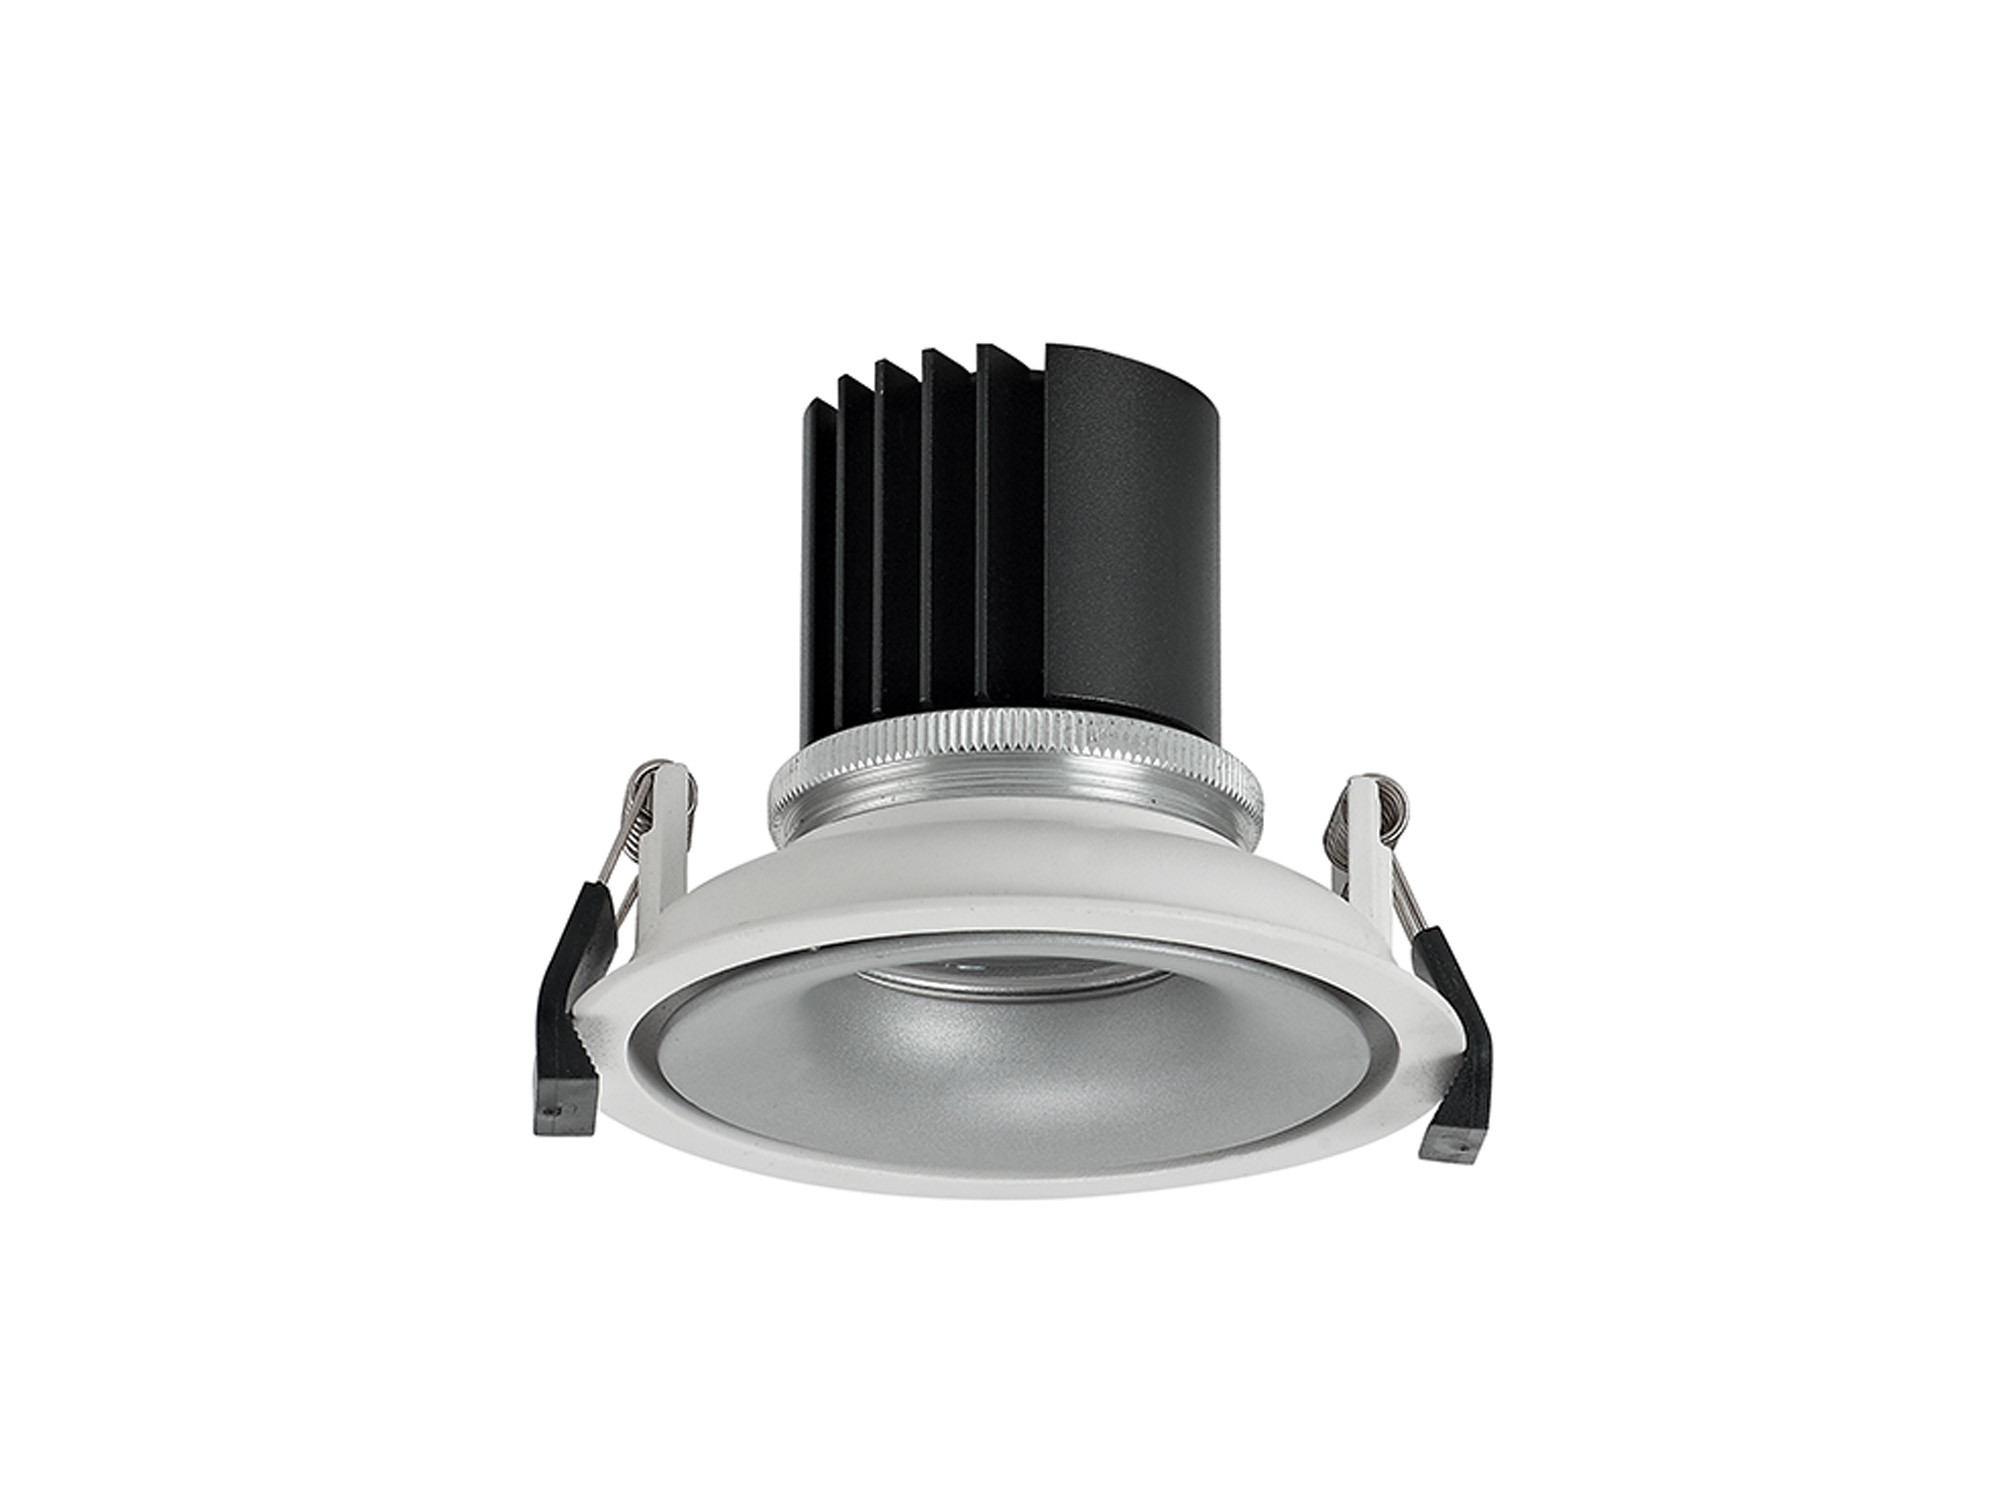 DM202036  Bolor 9 Tridonic Powered 9W 2700K 770lm 24° CRI>90 LED Engine White/Silver Fixed Recessed Spotlight; IP20